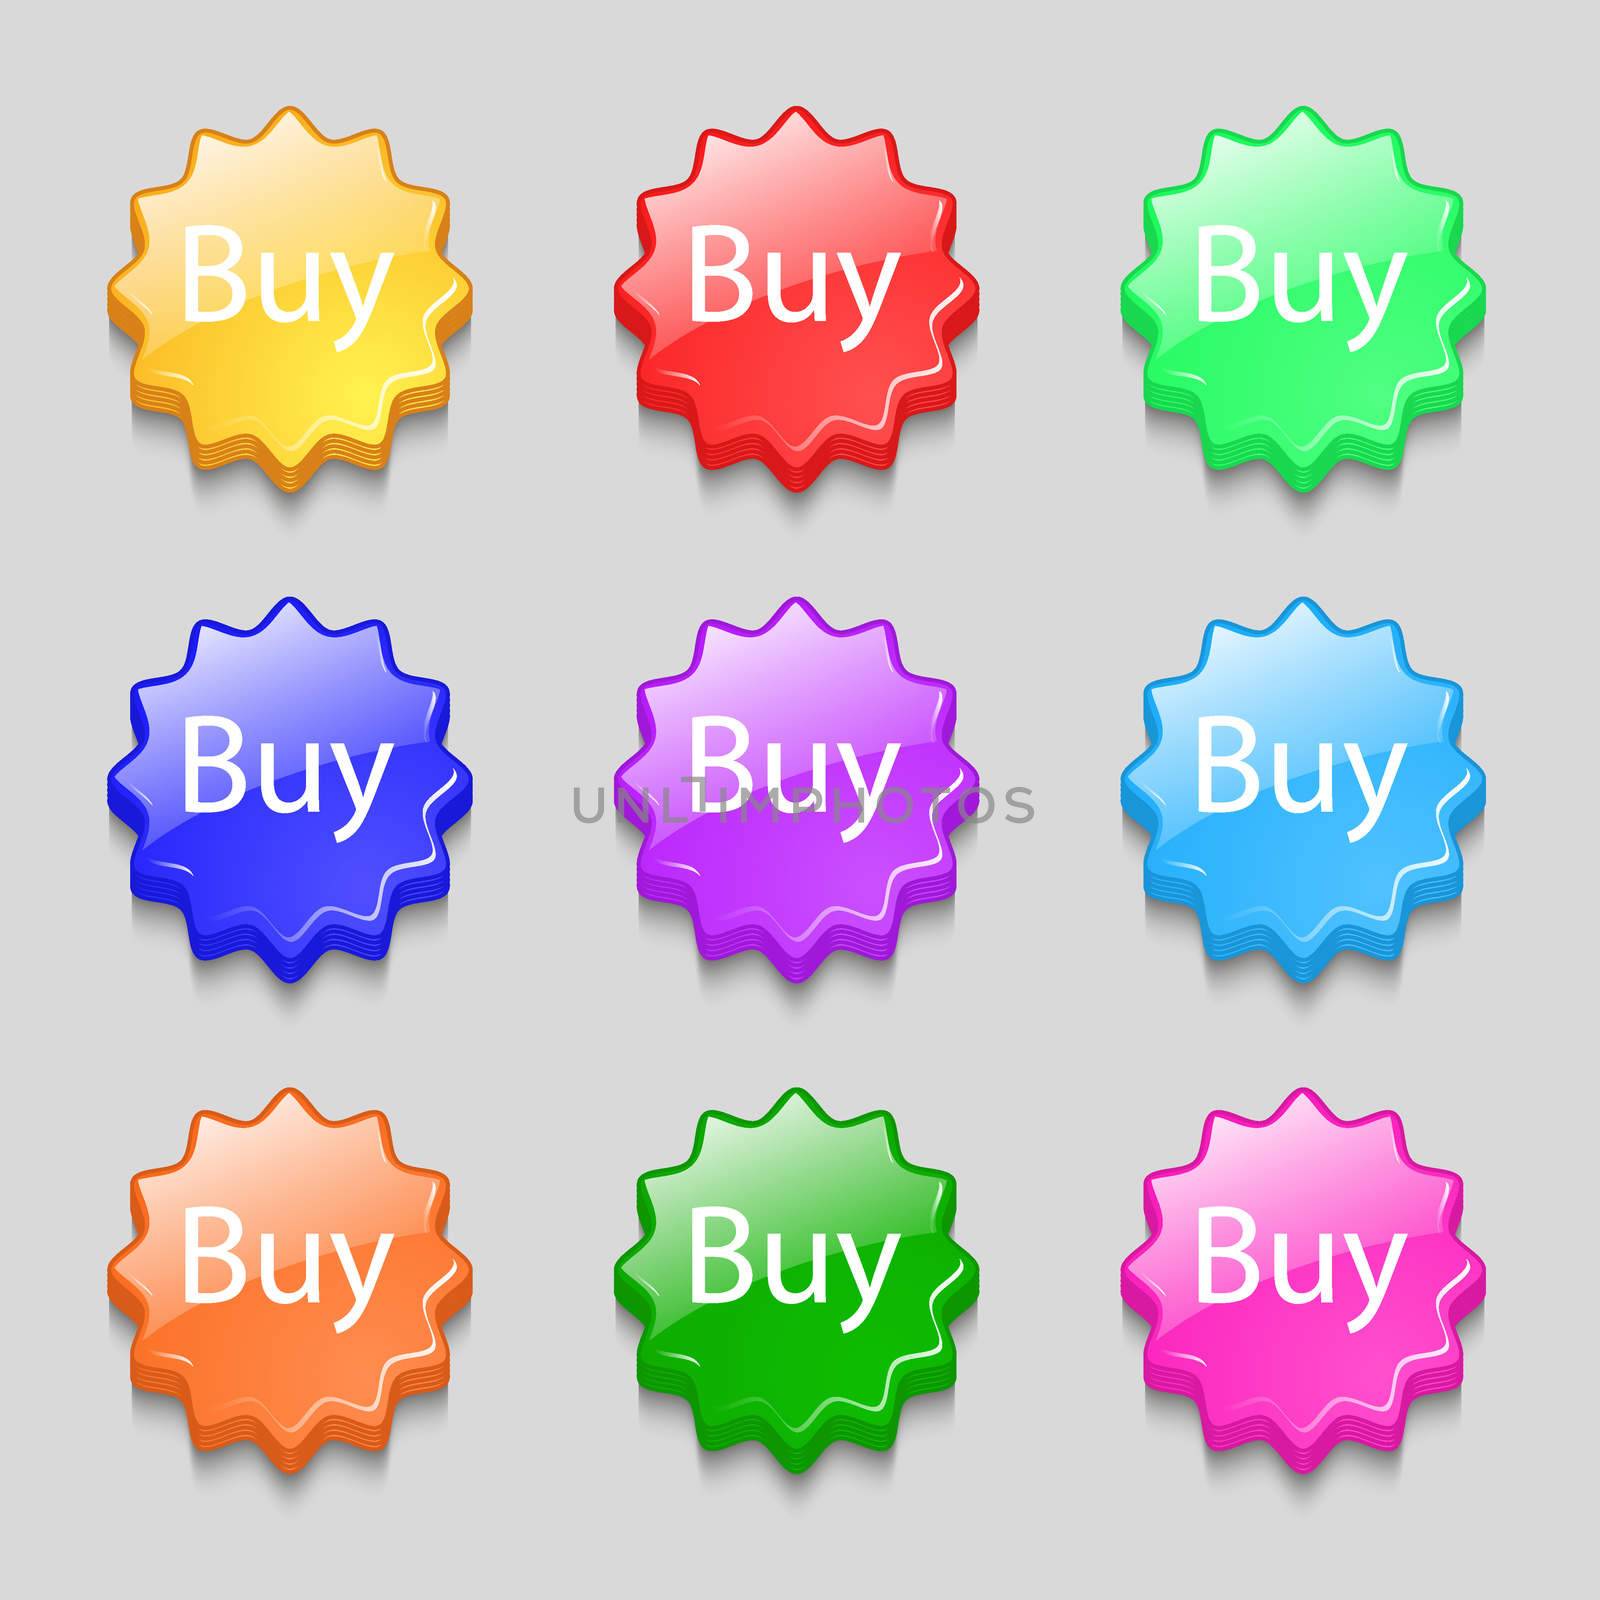 Buy sign icon. Online buying dollar usd button. Symbols on nine wavy colourful buttons.  by serhii_lohvyniuk